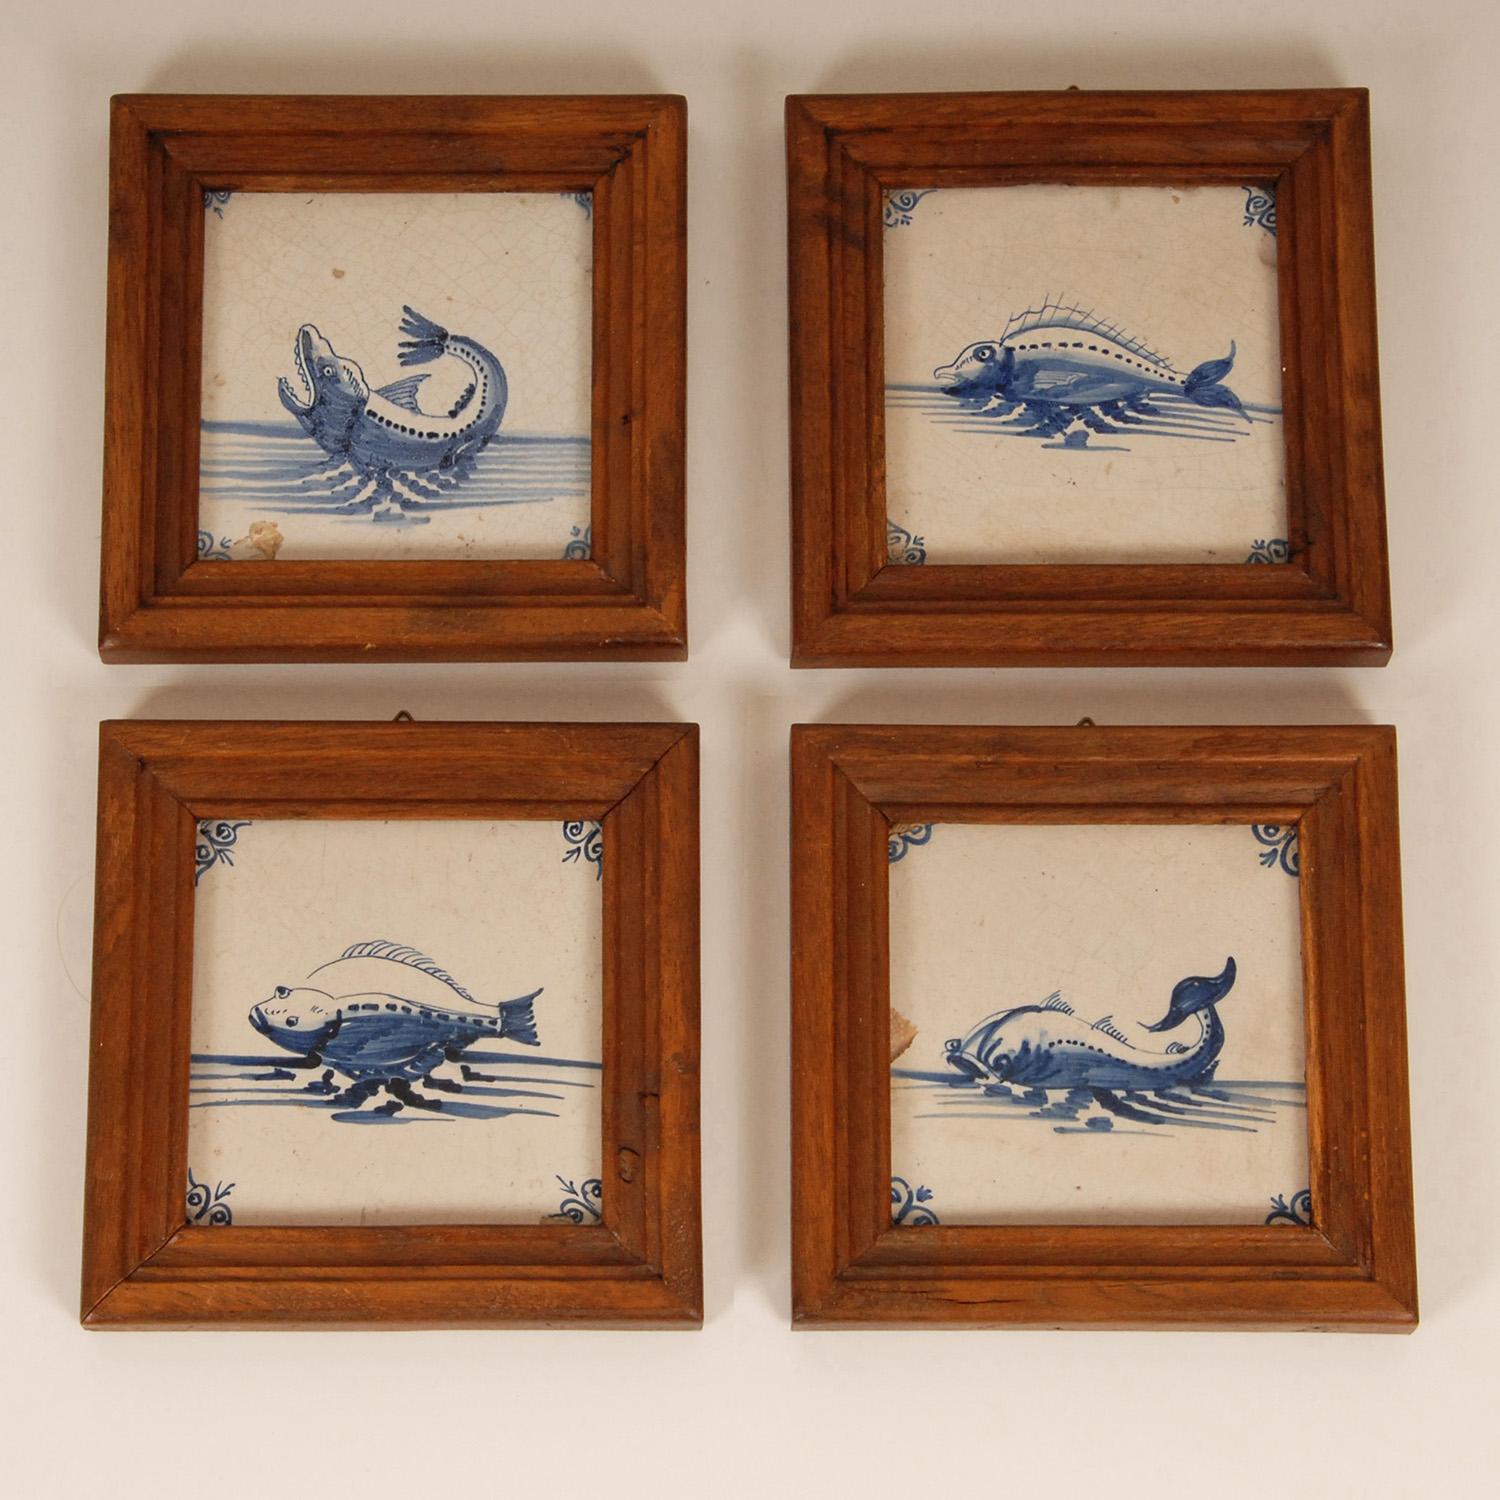 17th - 18th century Dutch Delft Tiles - set of 4
Oak framed blue and white tiles.
Depicting seacreatures, sea monster, fish
Design: In the manner of Royal Delft, AK Dutch Delftware
Style, Antique, Baroque, Louis XIV, 17th century / 18th